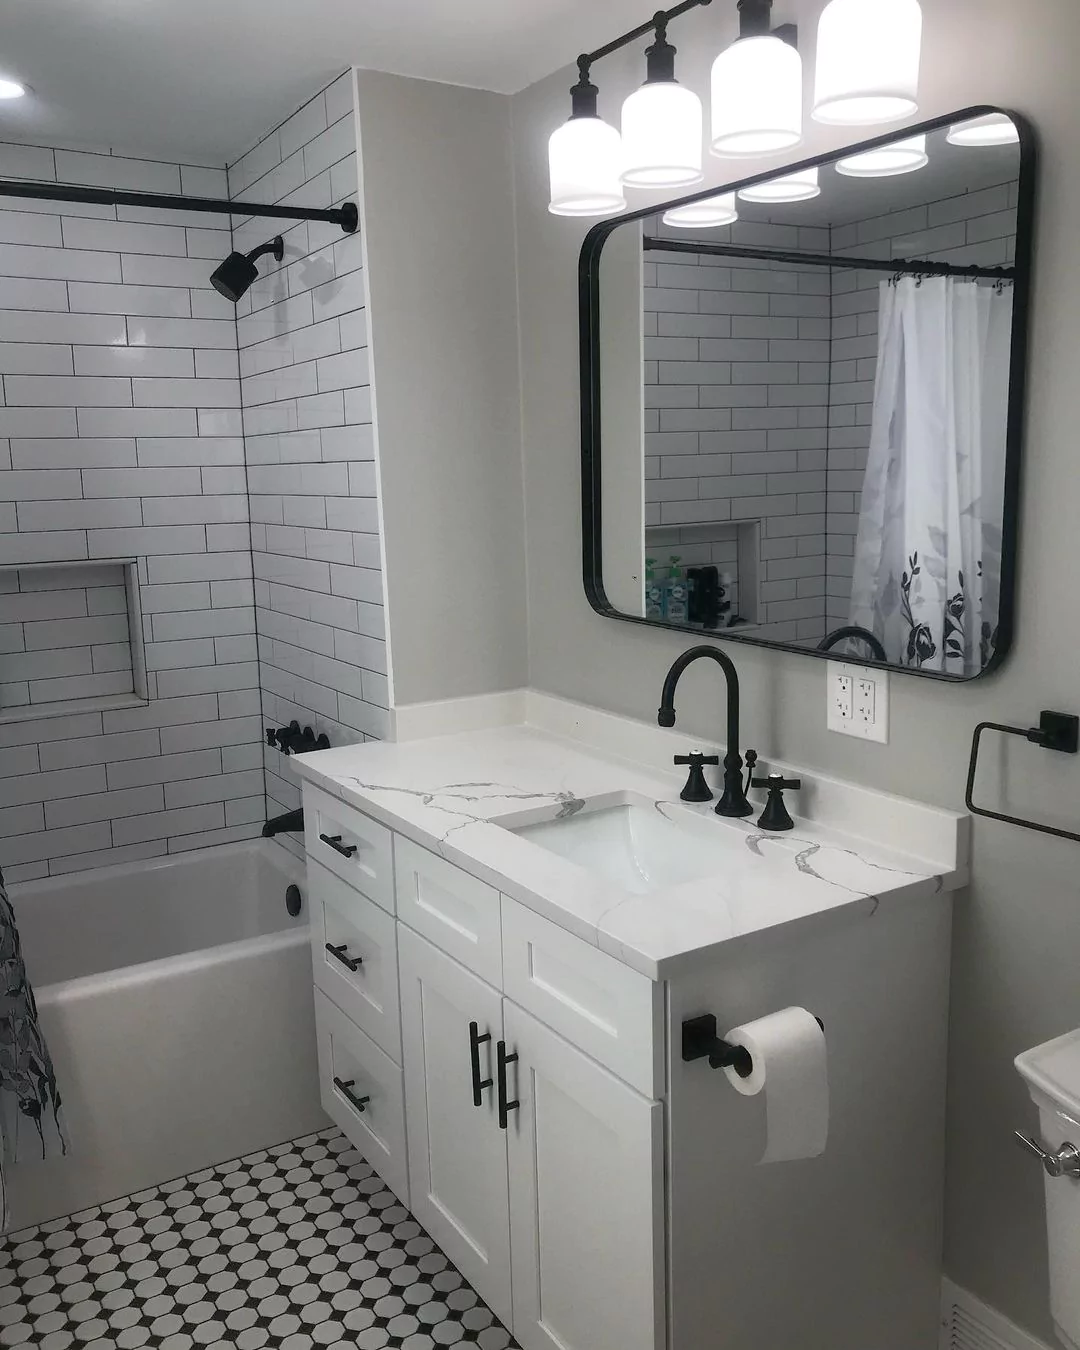 chicagoland remodeling bathroom north brook il 1 4